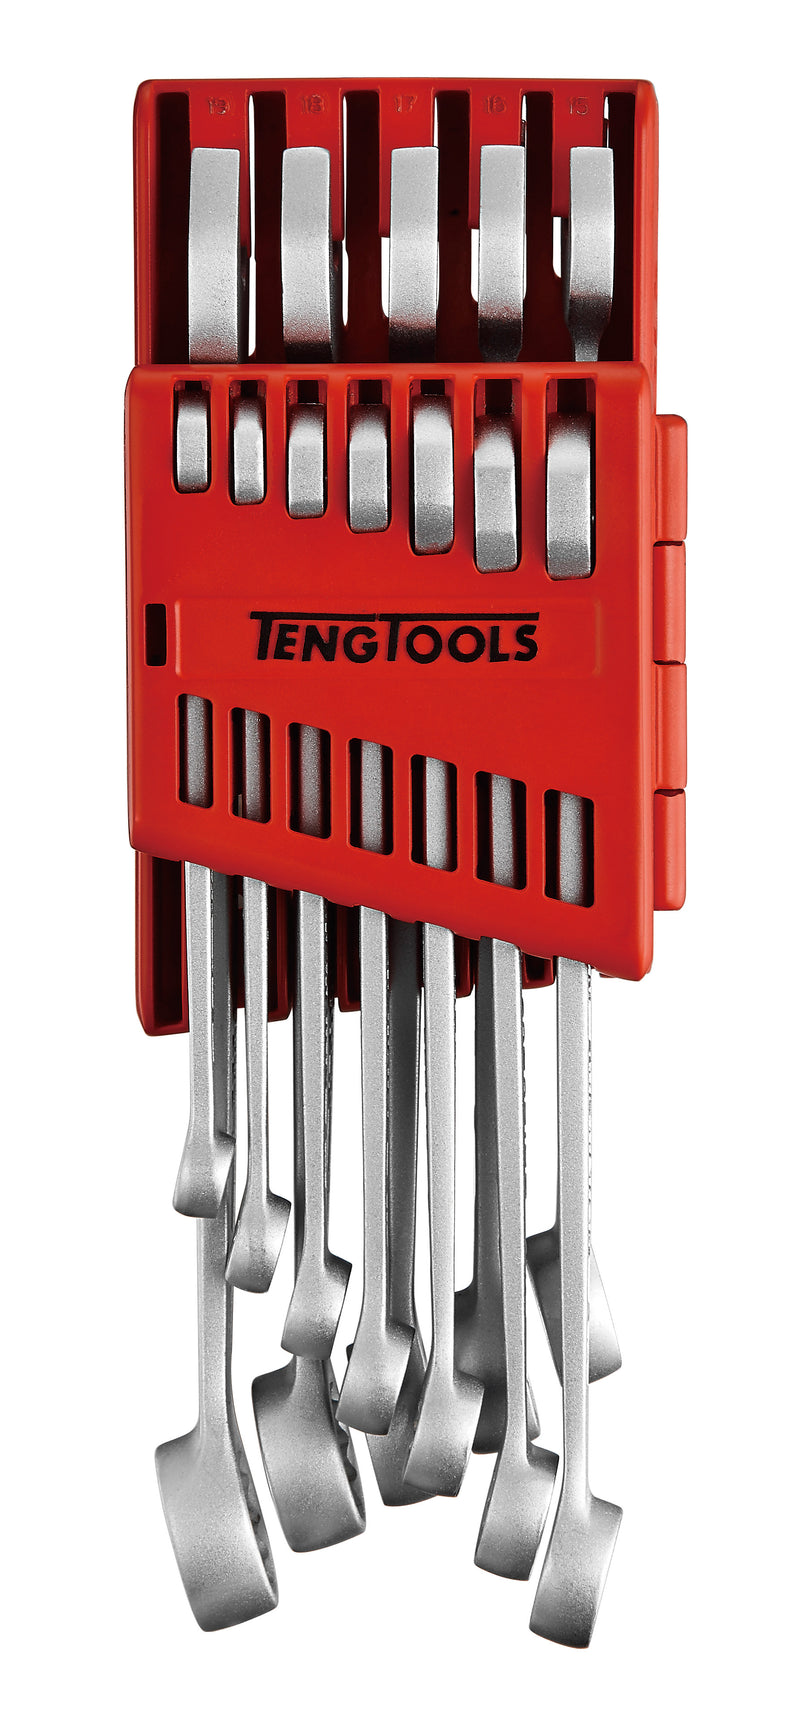 Teng Tools at Monaghan Hire, Irelands leading tool supplier